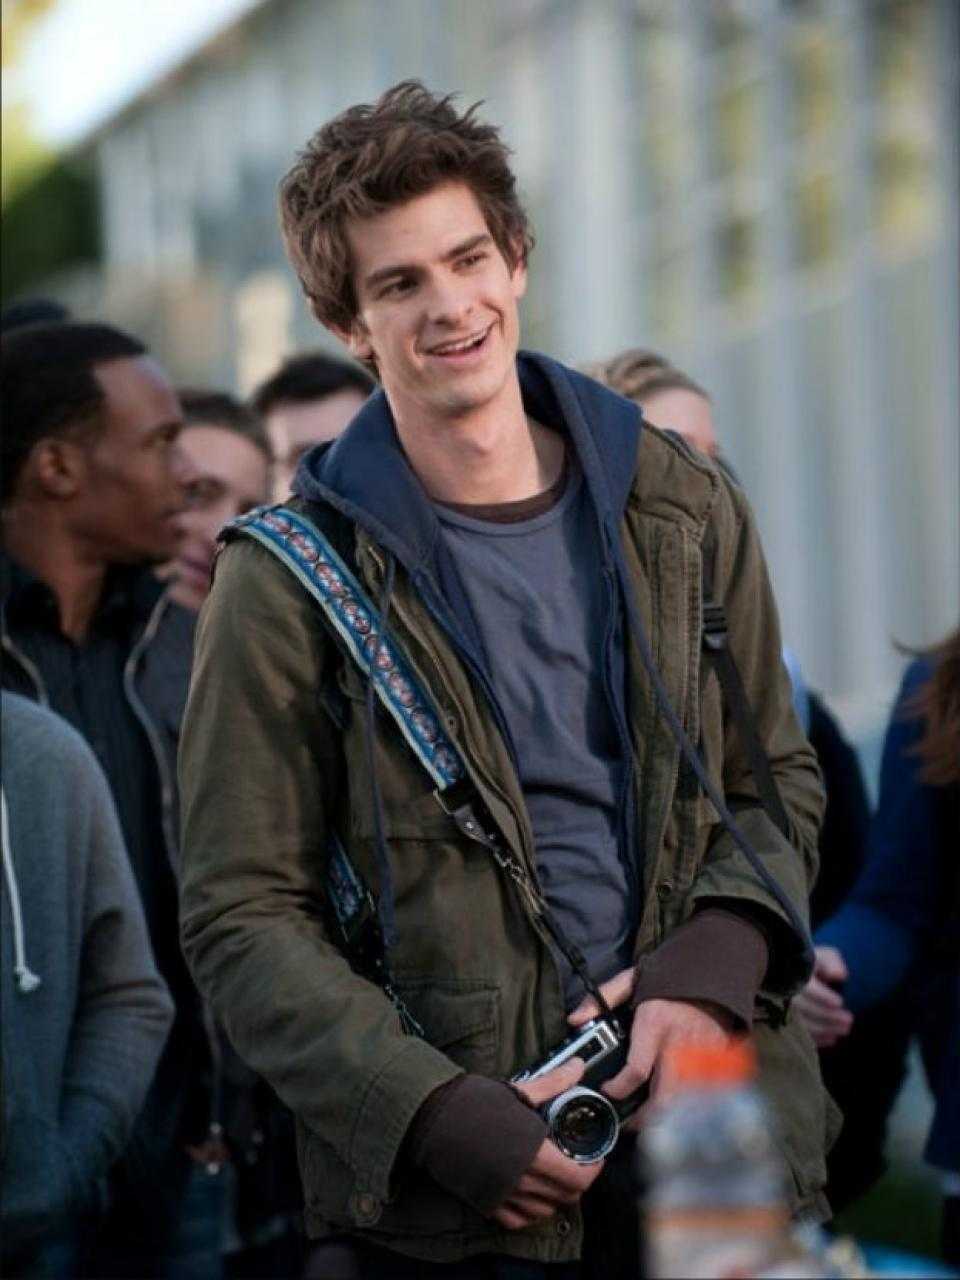 Andrew Garfield as Peter Parker/Spider-Man in The Amazing Spider-Man. He is wearing a green jacket and smiling while holding a camera. - Andrew Garfield